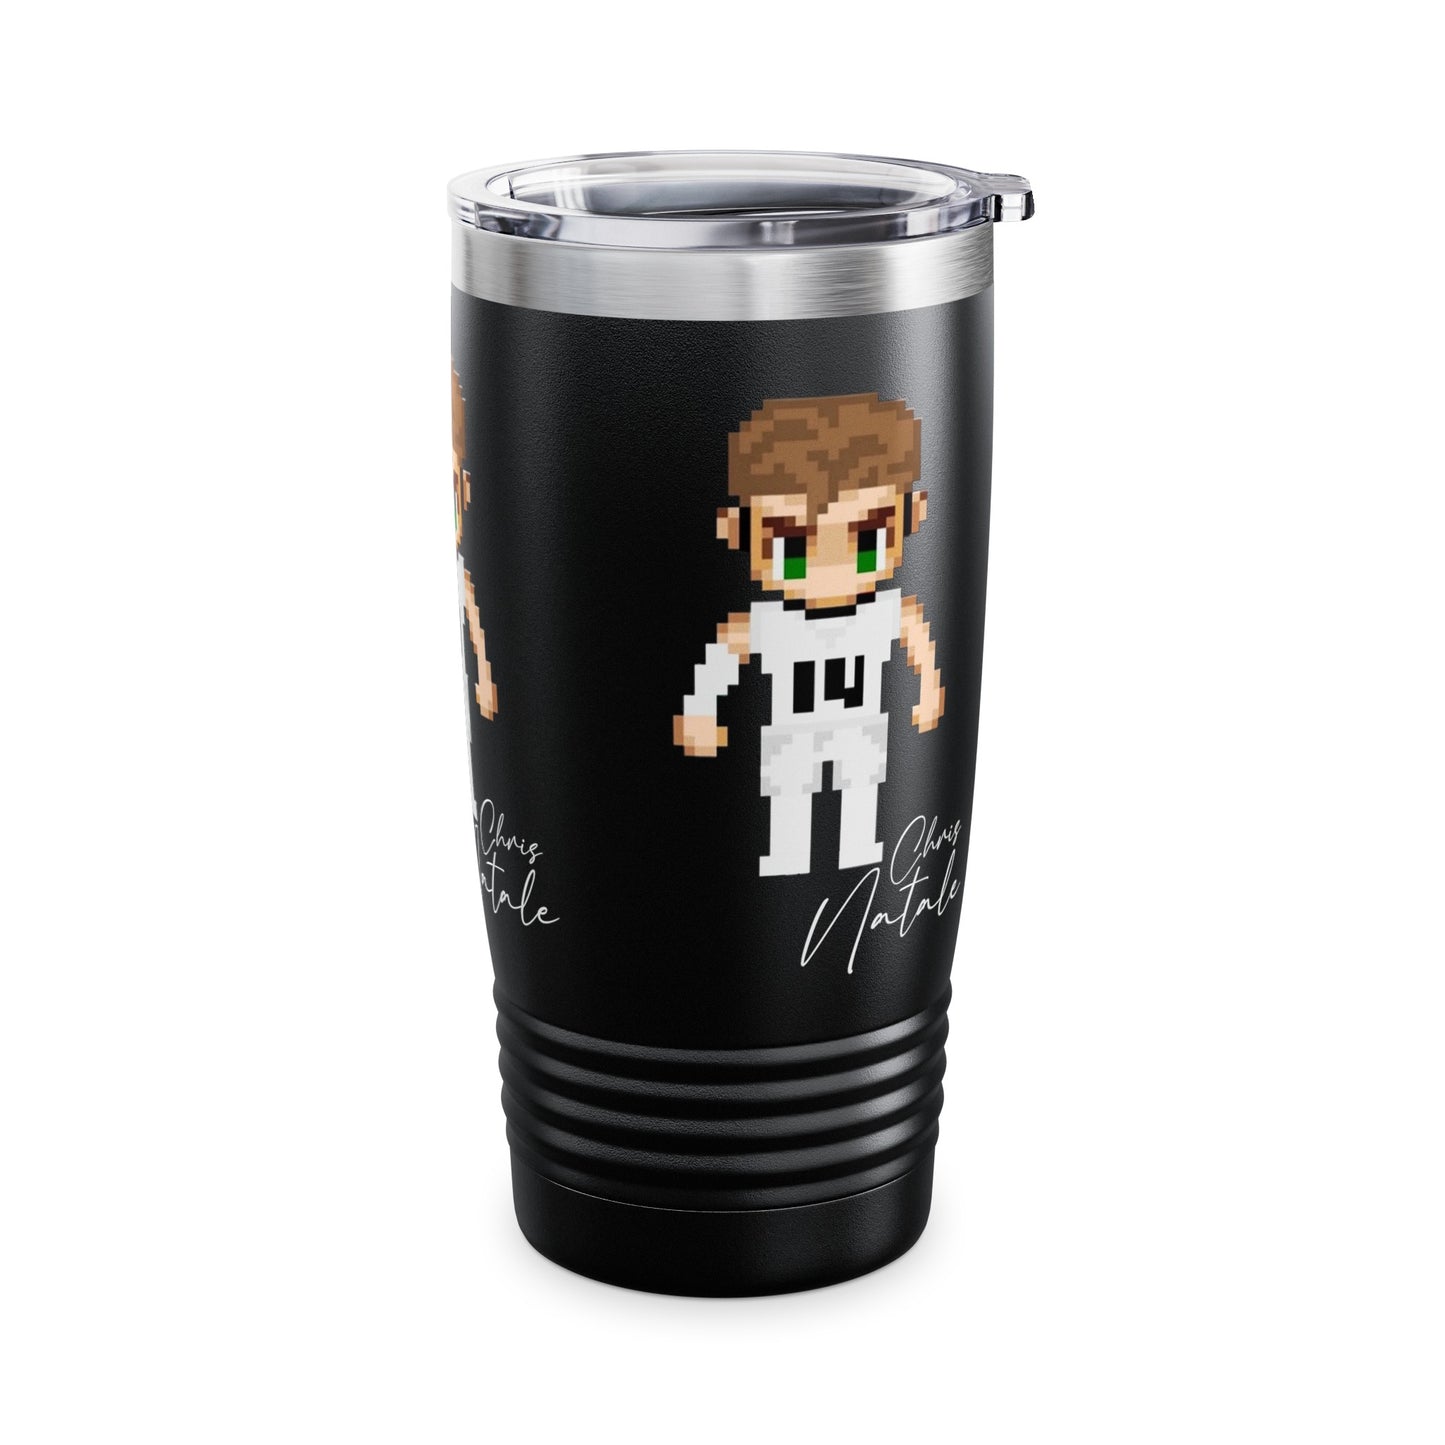 Chris Natale Stainless Steal Tumbler